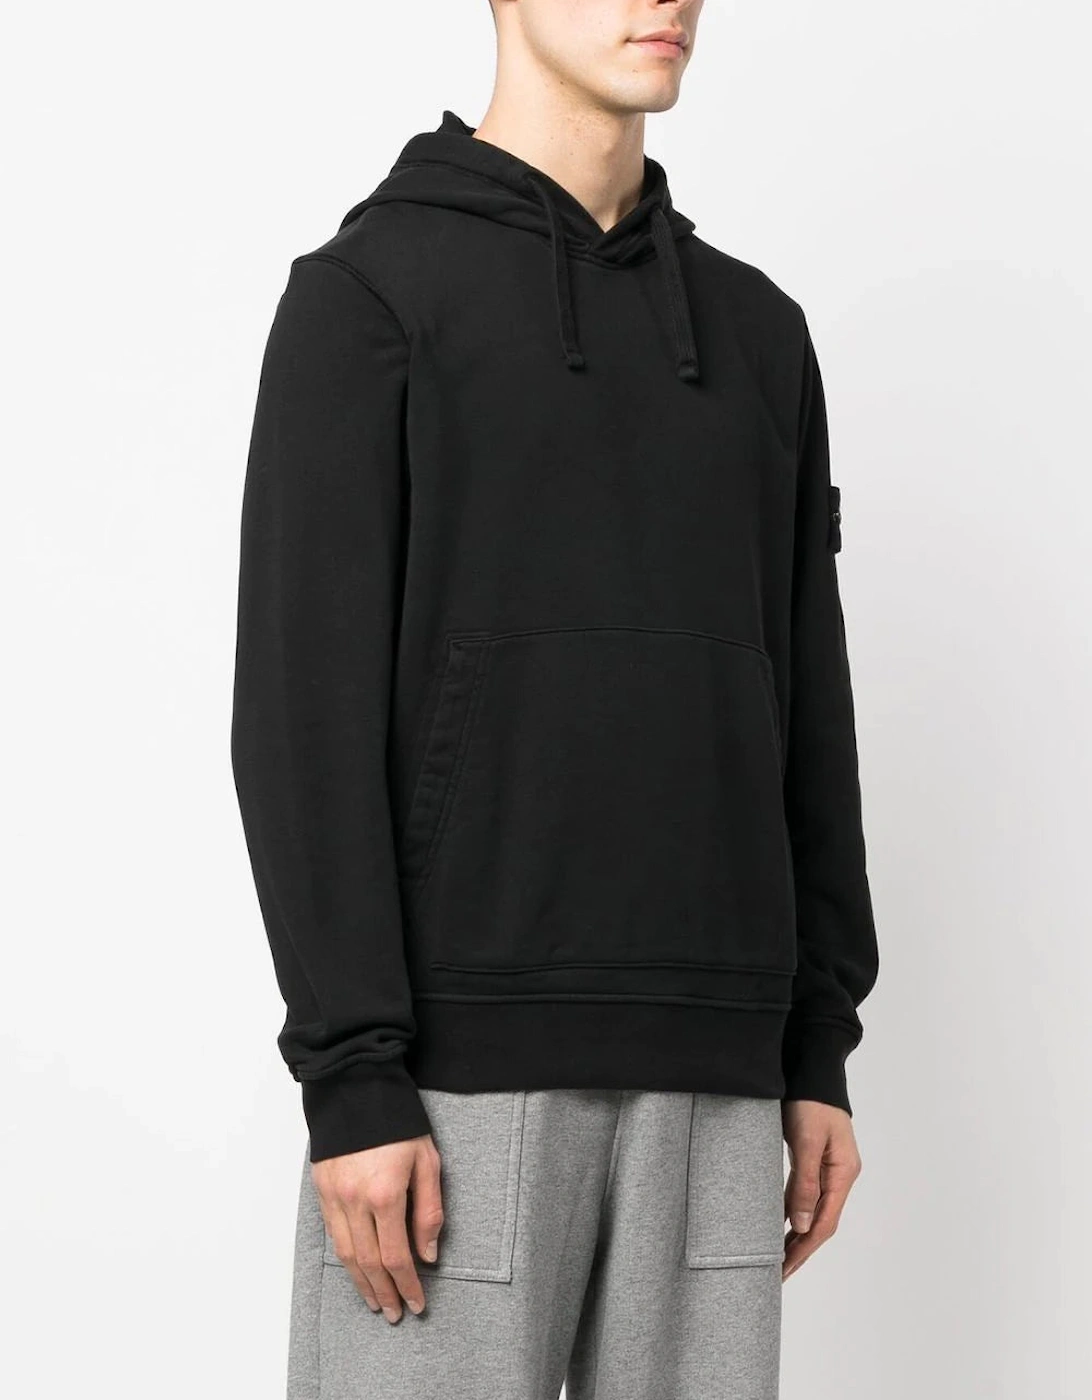 Compass Patch Drawstring Hoodie in Black